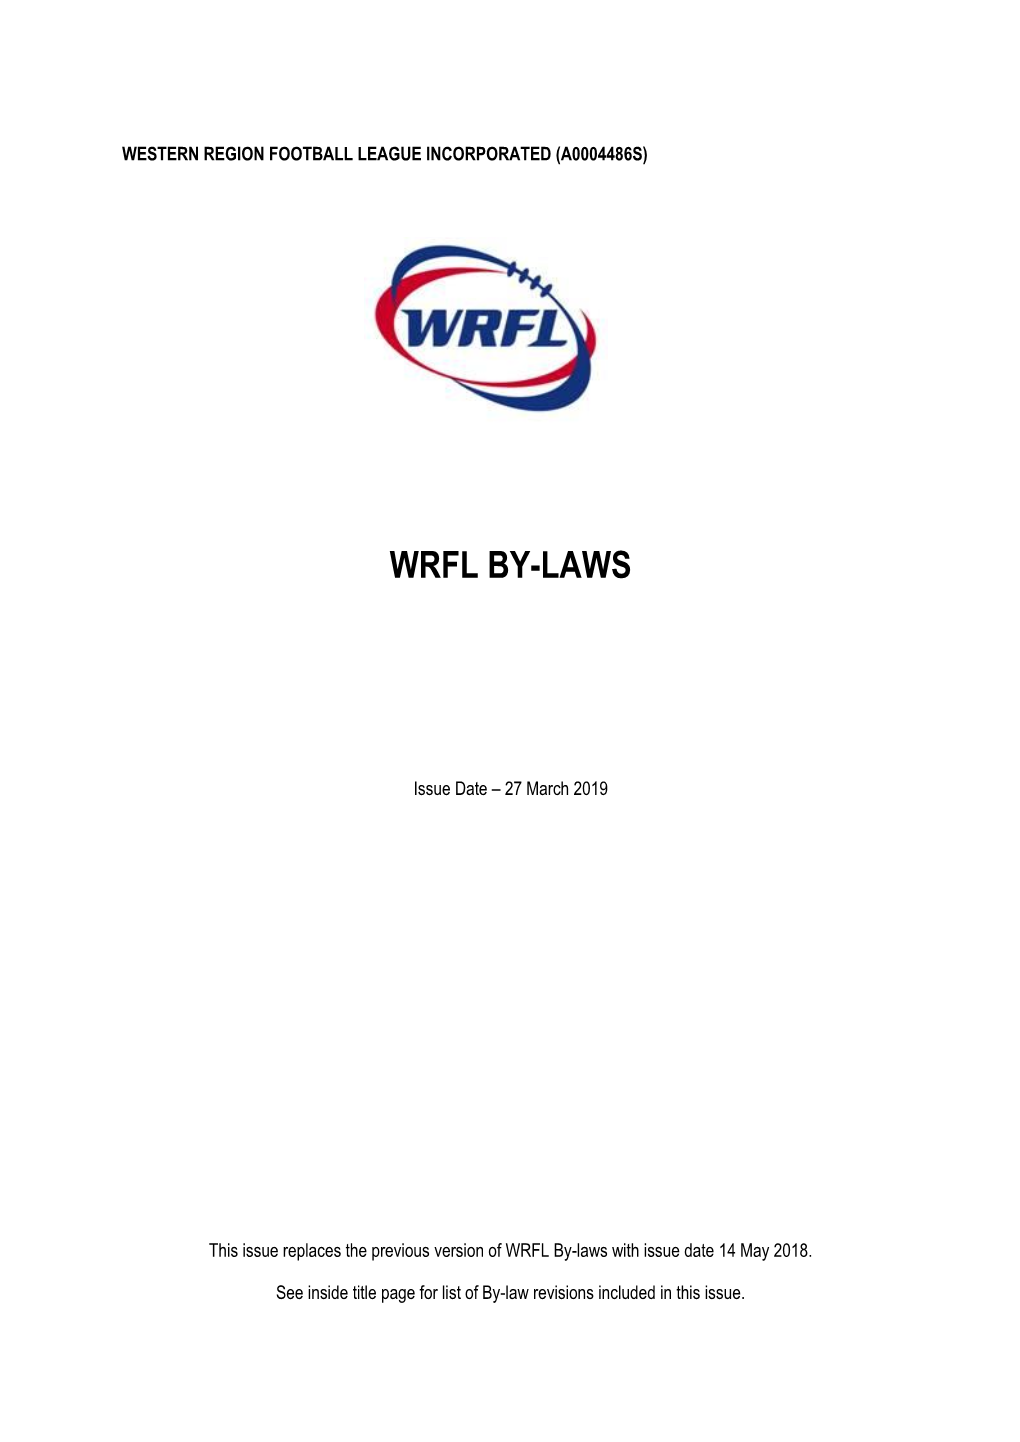 Wrfl By-Laws